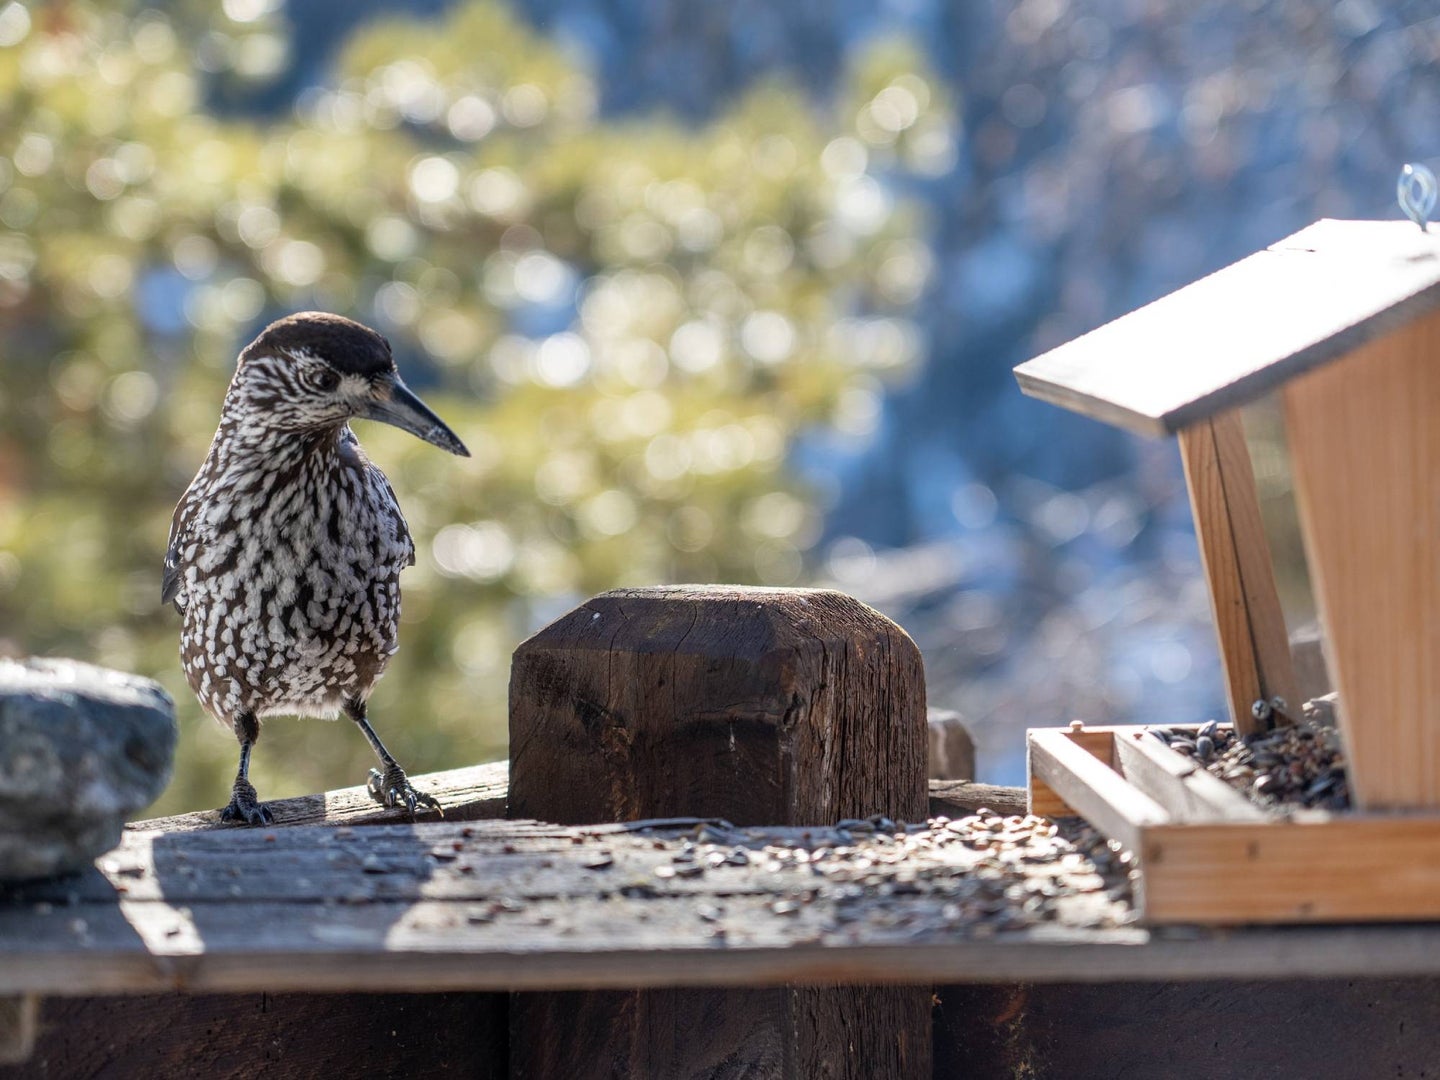 Give the birds a clean, disease-free,  five-star accommodation.